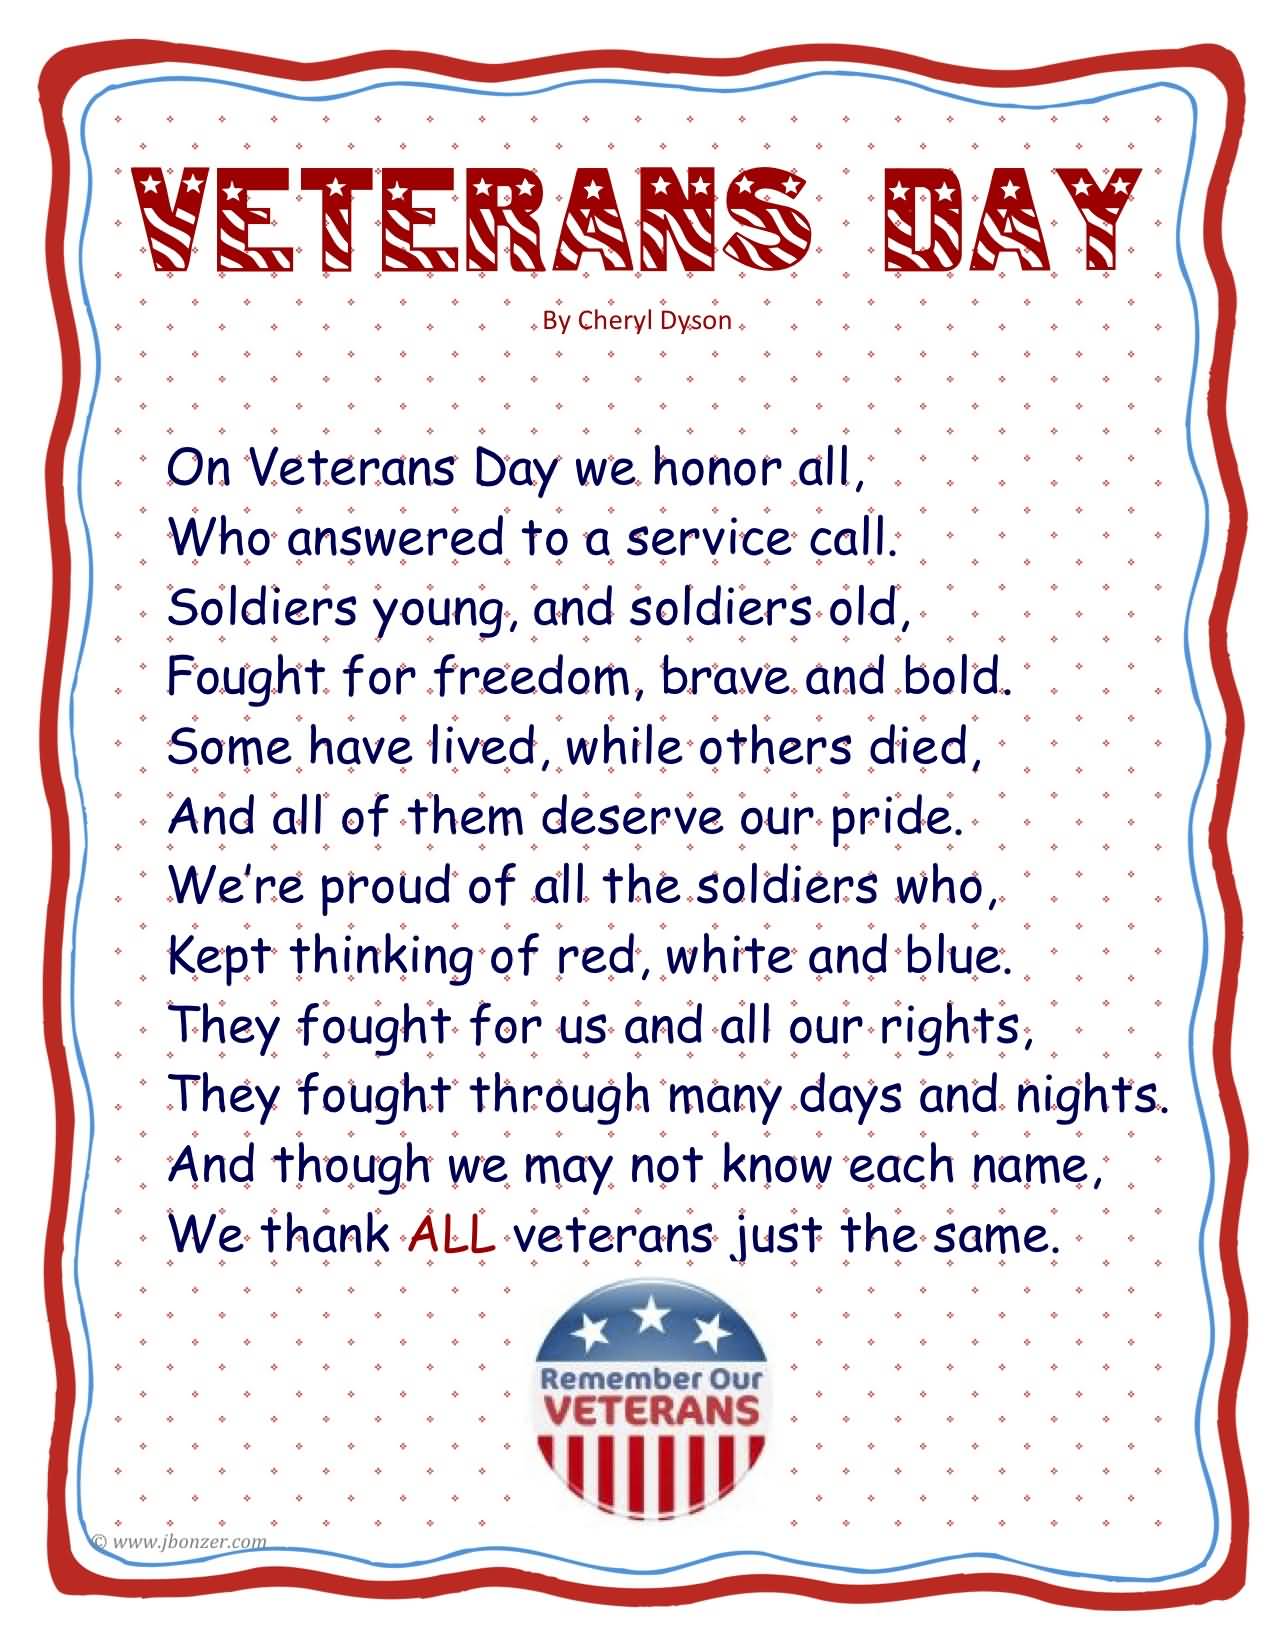 On Veterans Day We Honor All, Who Answered To A Service Call